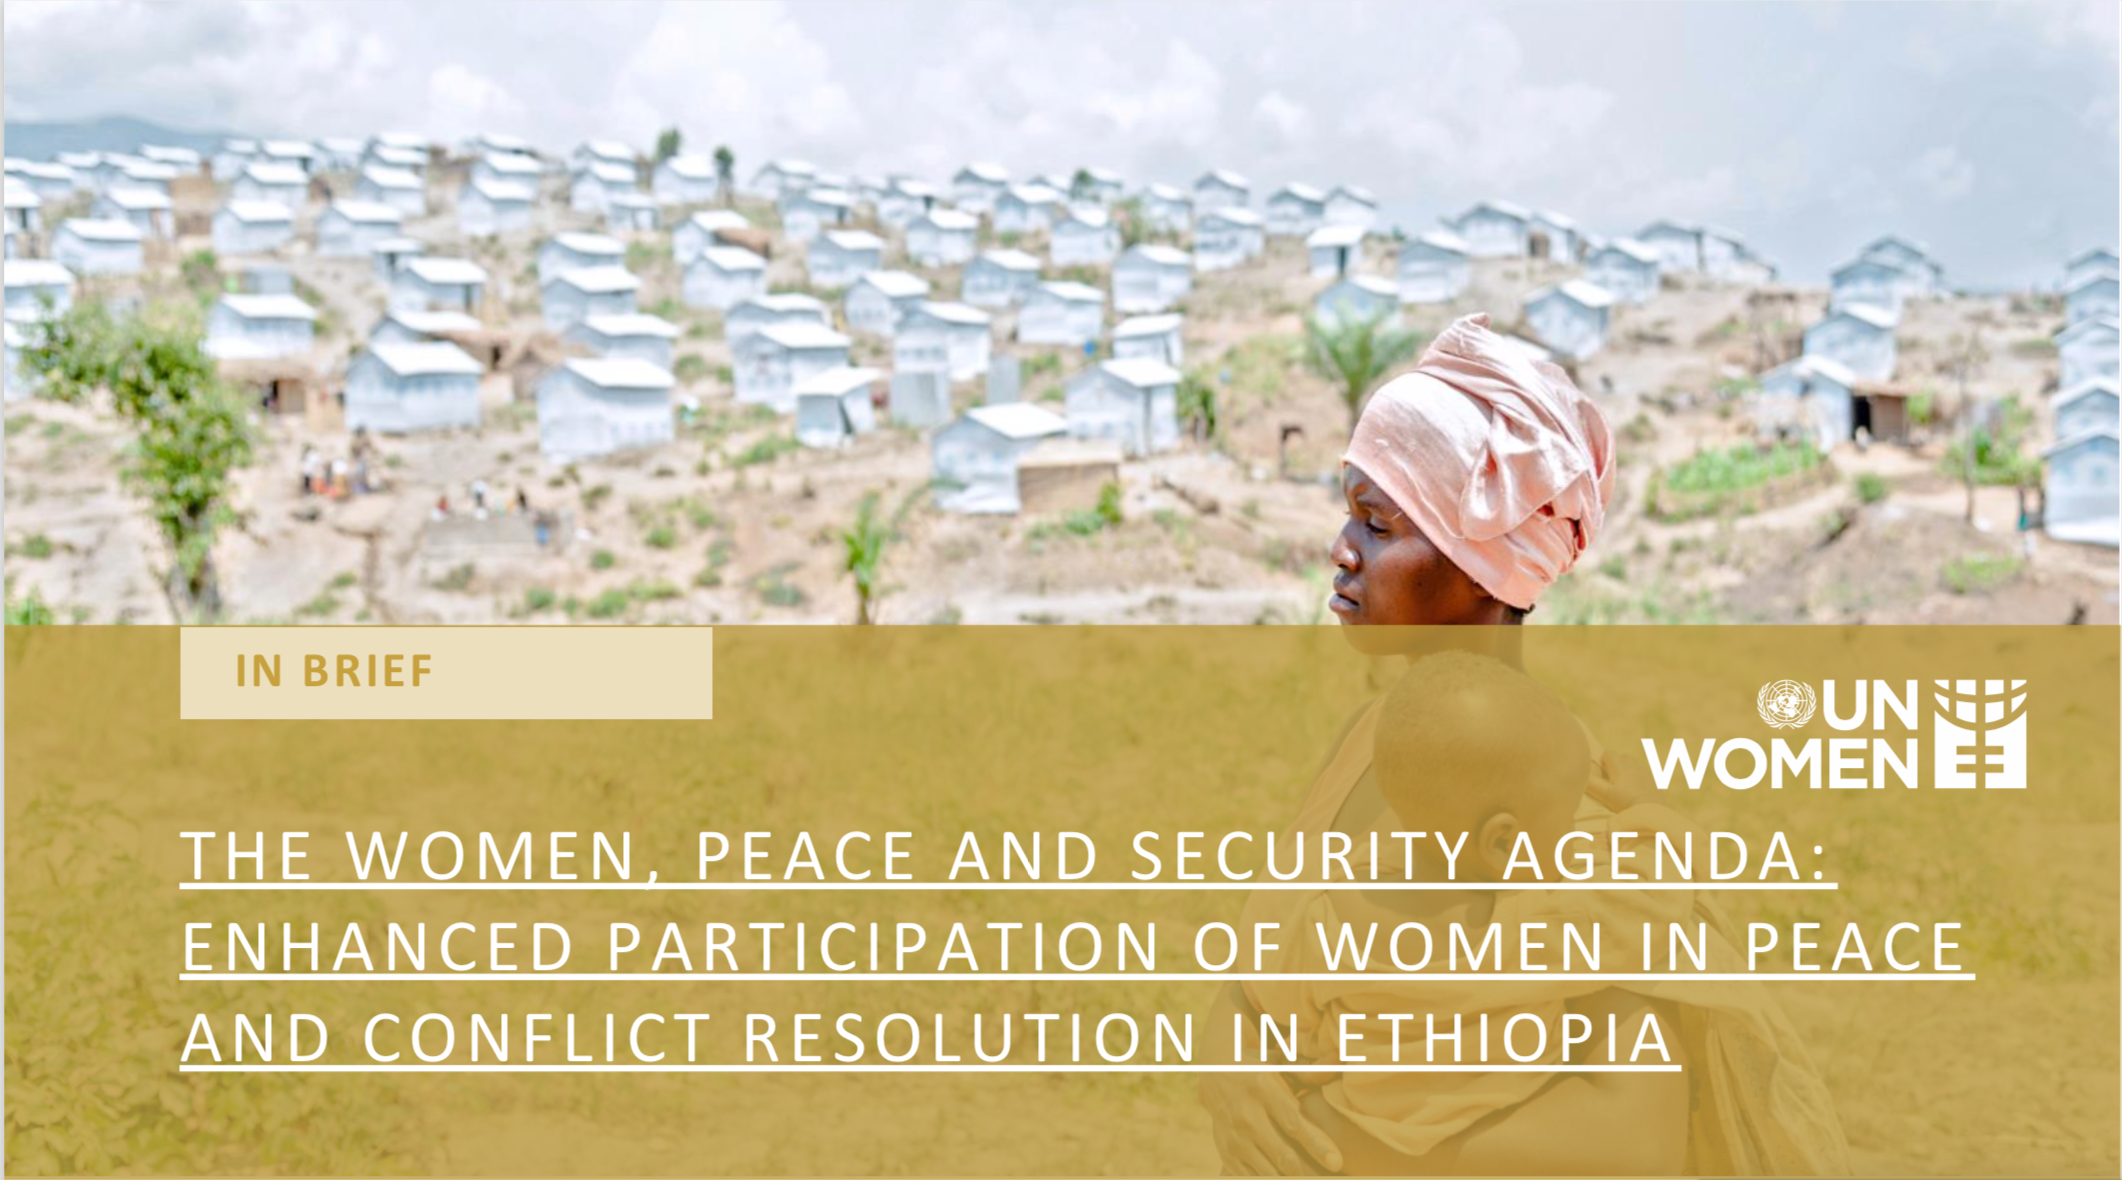 THE WOMEN, PEACE AND SECURITY AGENDA: ENHANCED PARTICIPATION OF WOMEN IN PEACE AND CONFLICT RESOLUTION IN ETHIOPIA